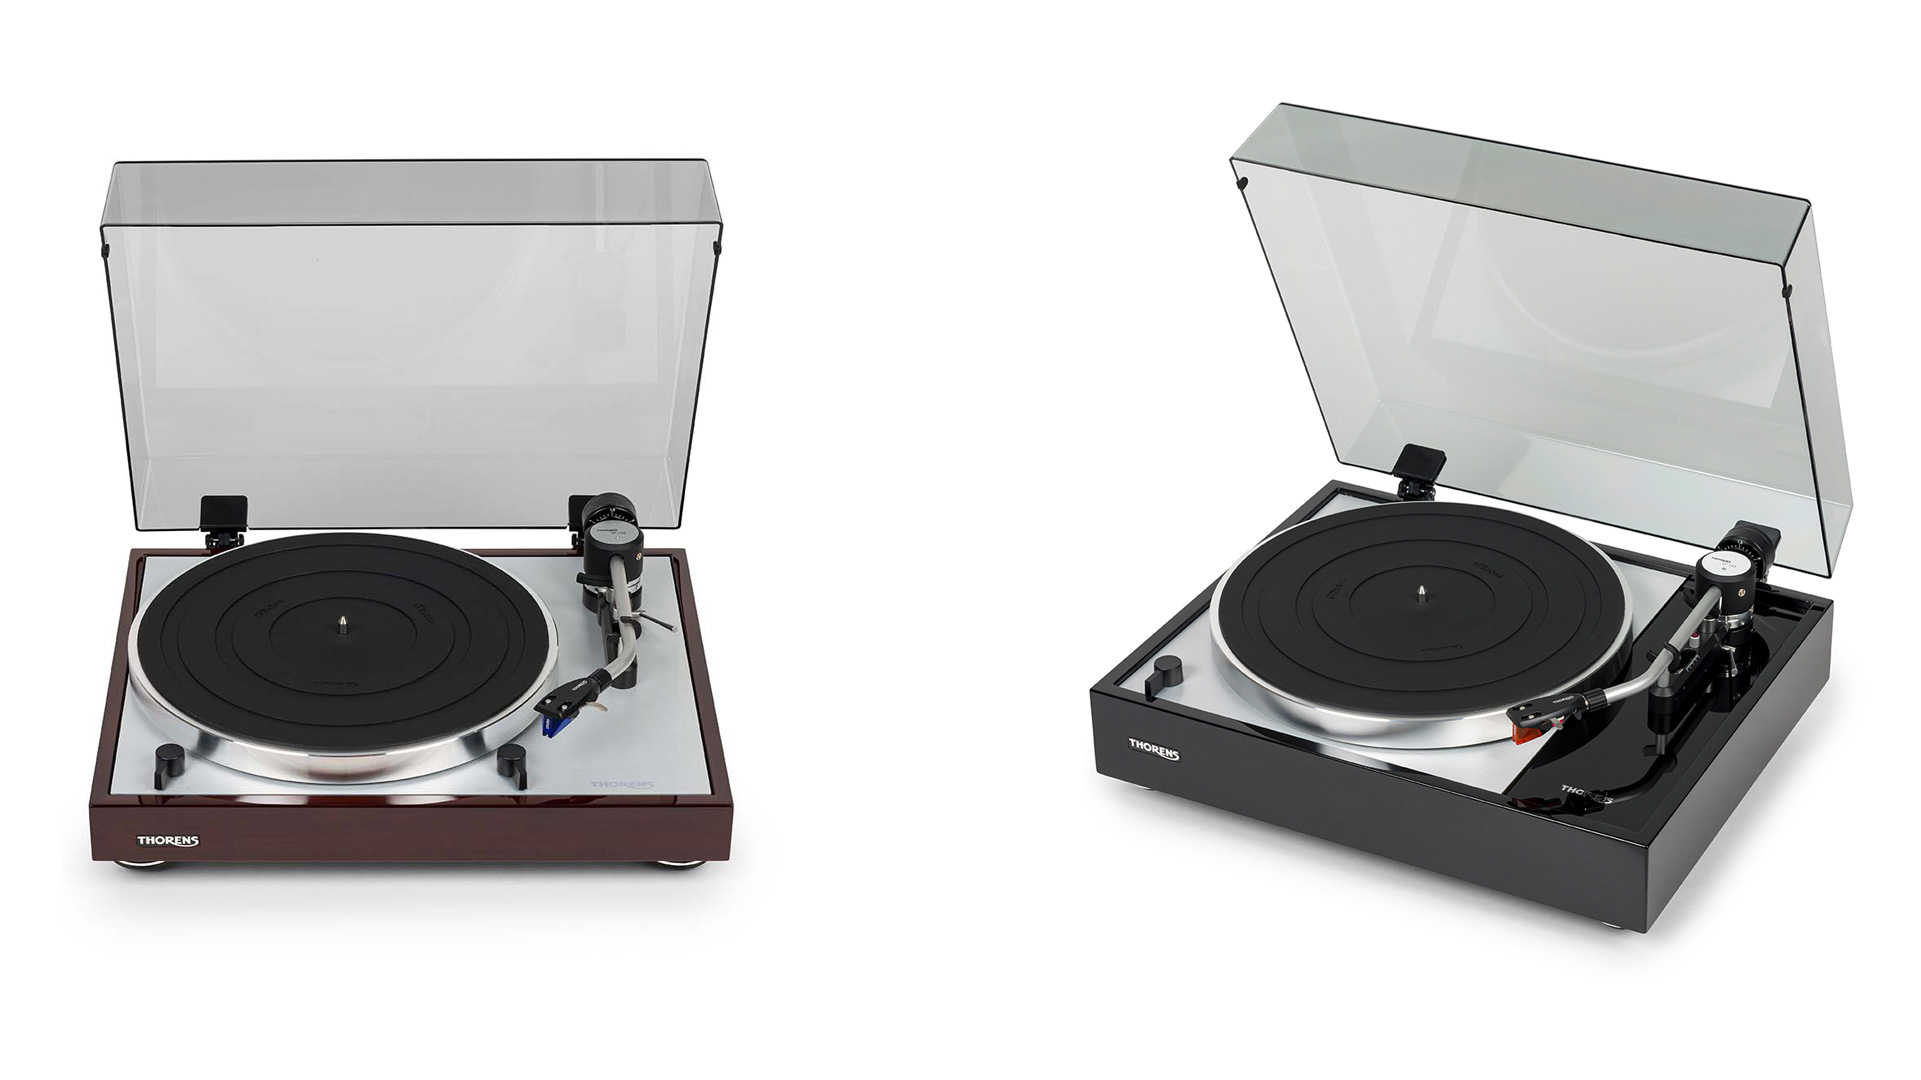 The new Thorens Turntables TD 403 DD and TD 1500 (Image Credit: Thorens)